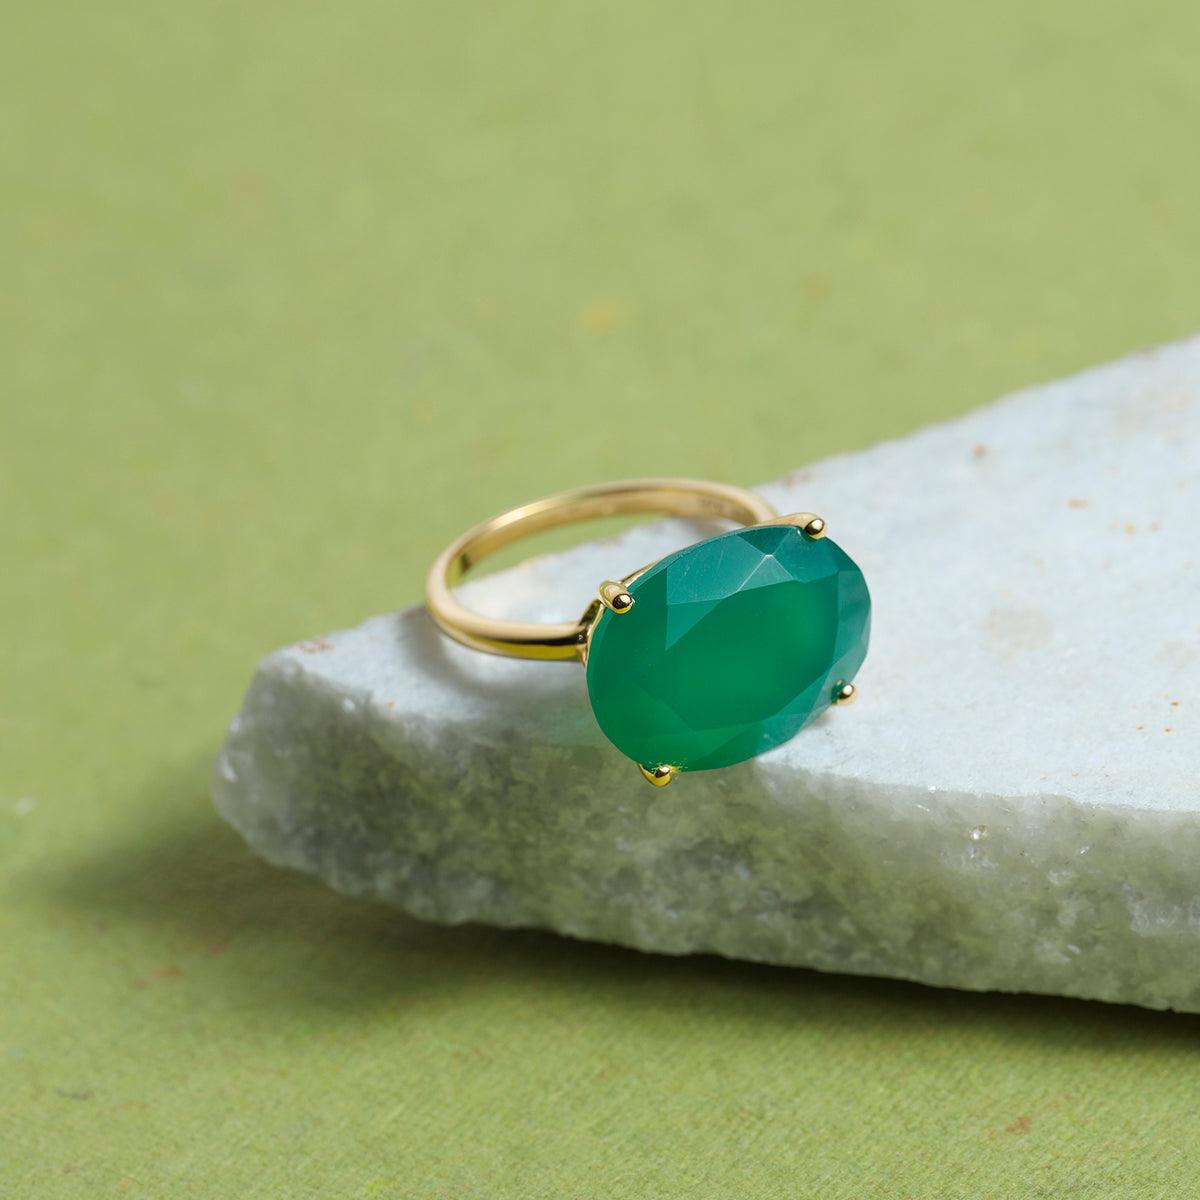 Green Onyx Solitaire Ring 14k Gold Over 925 Silver - YoTreasure